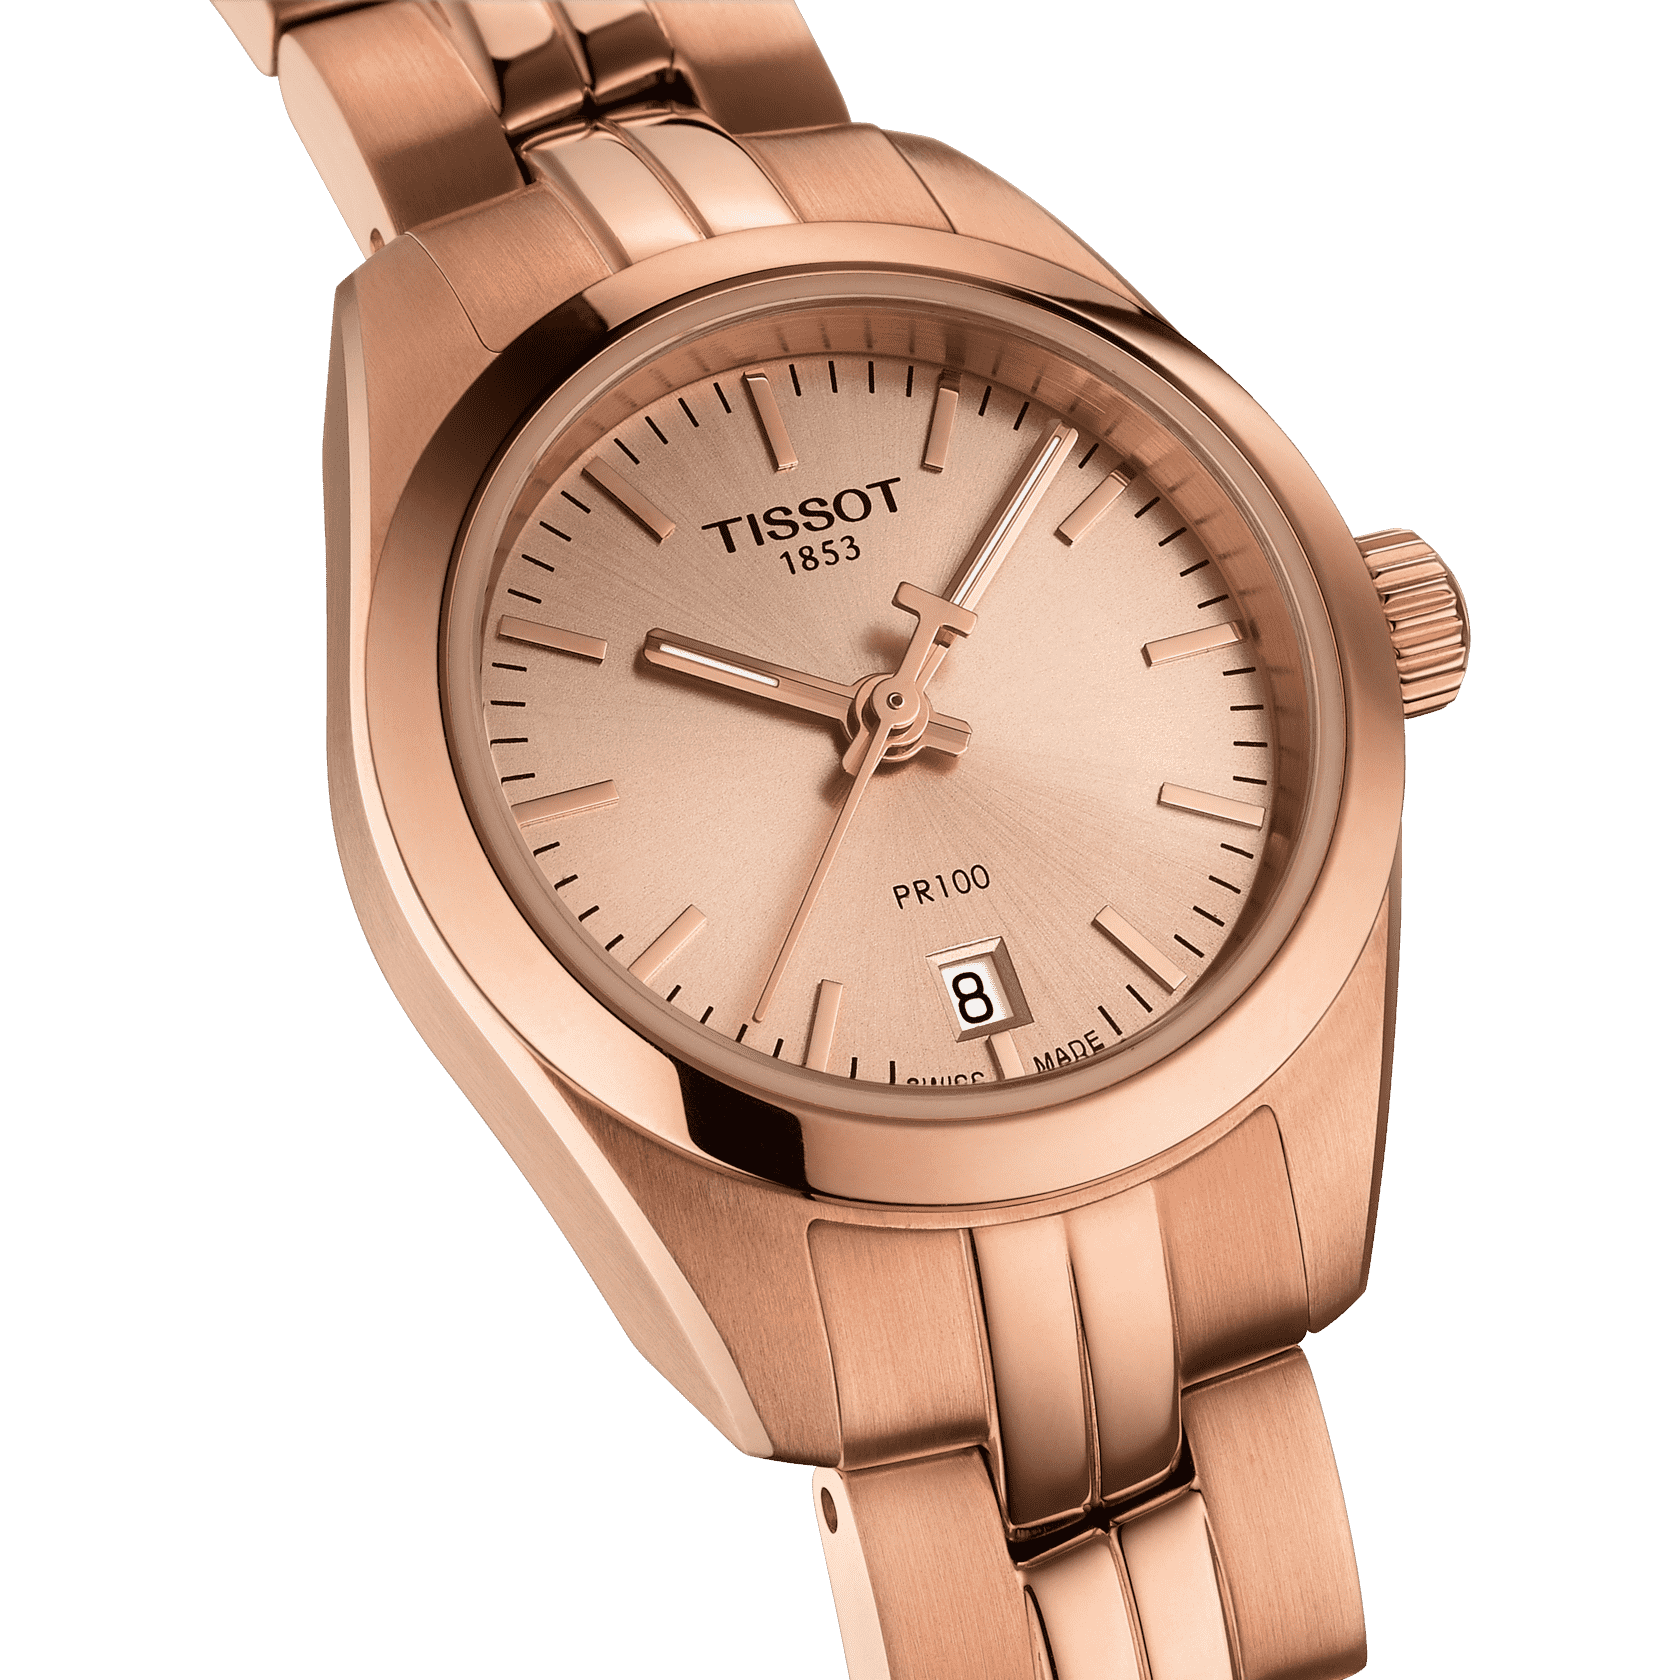 Buy Replica Watches From Turkey Online